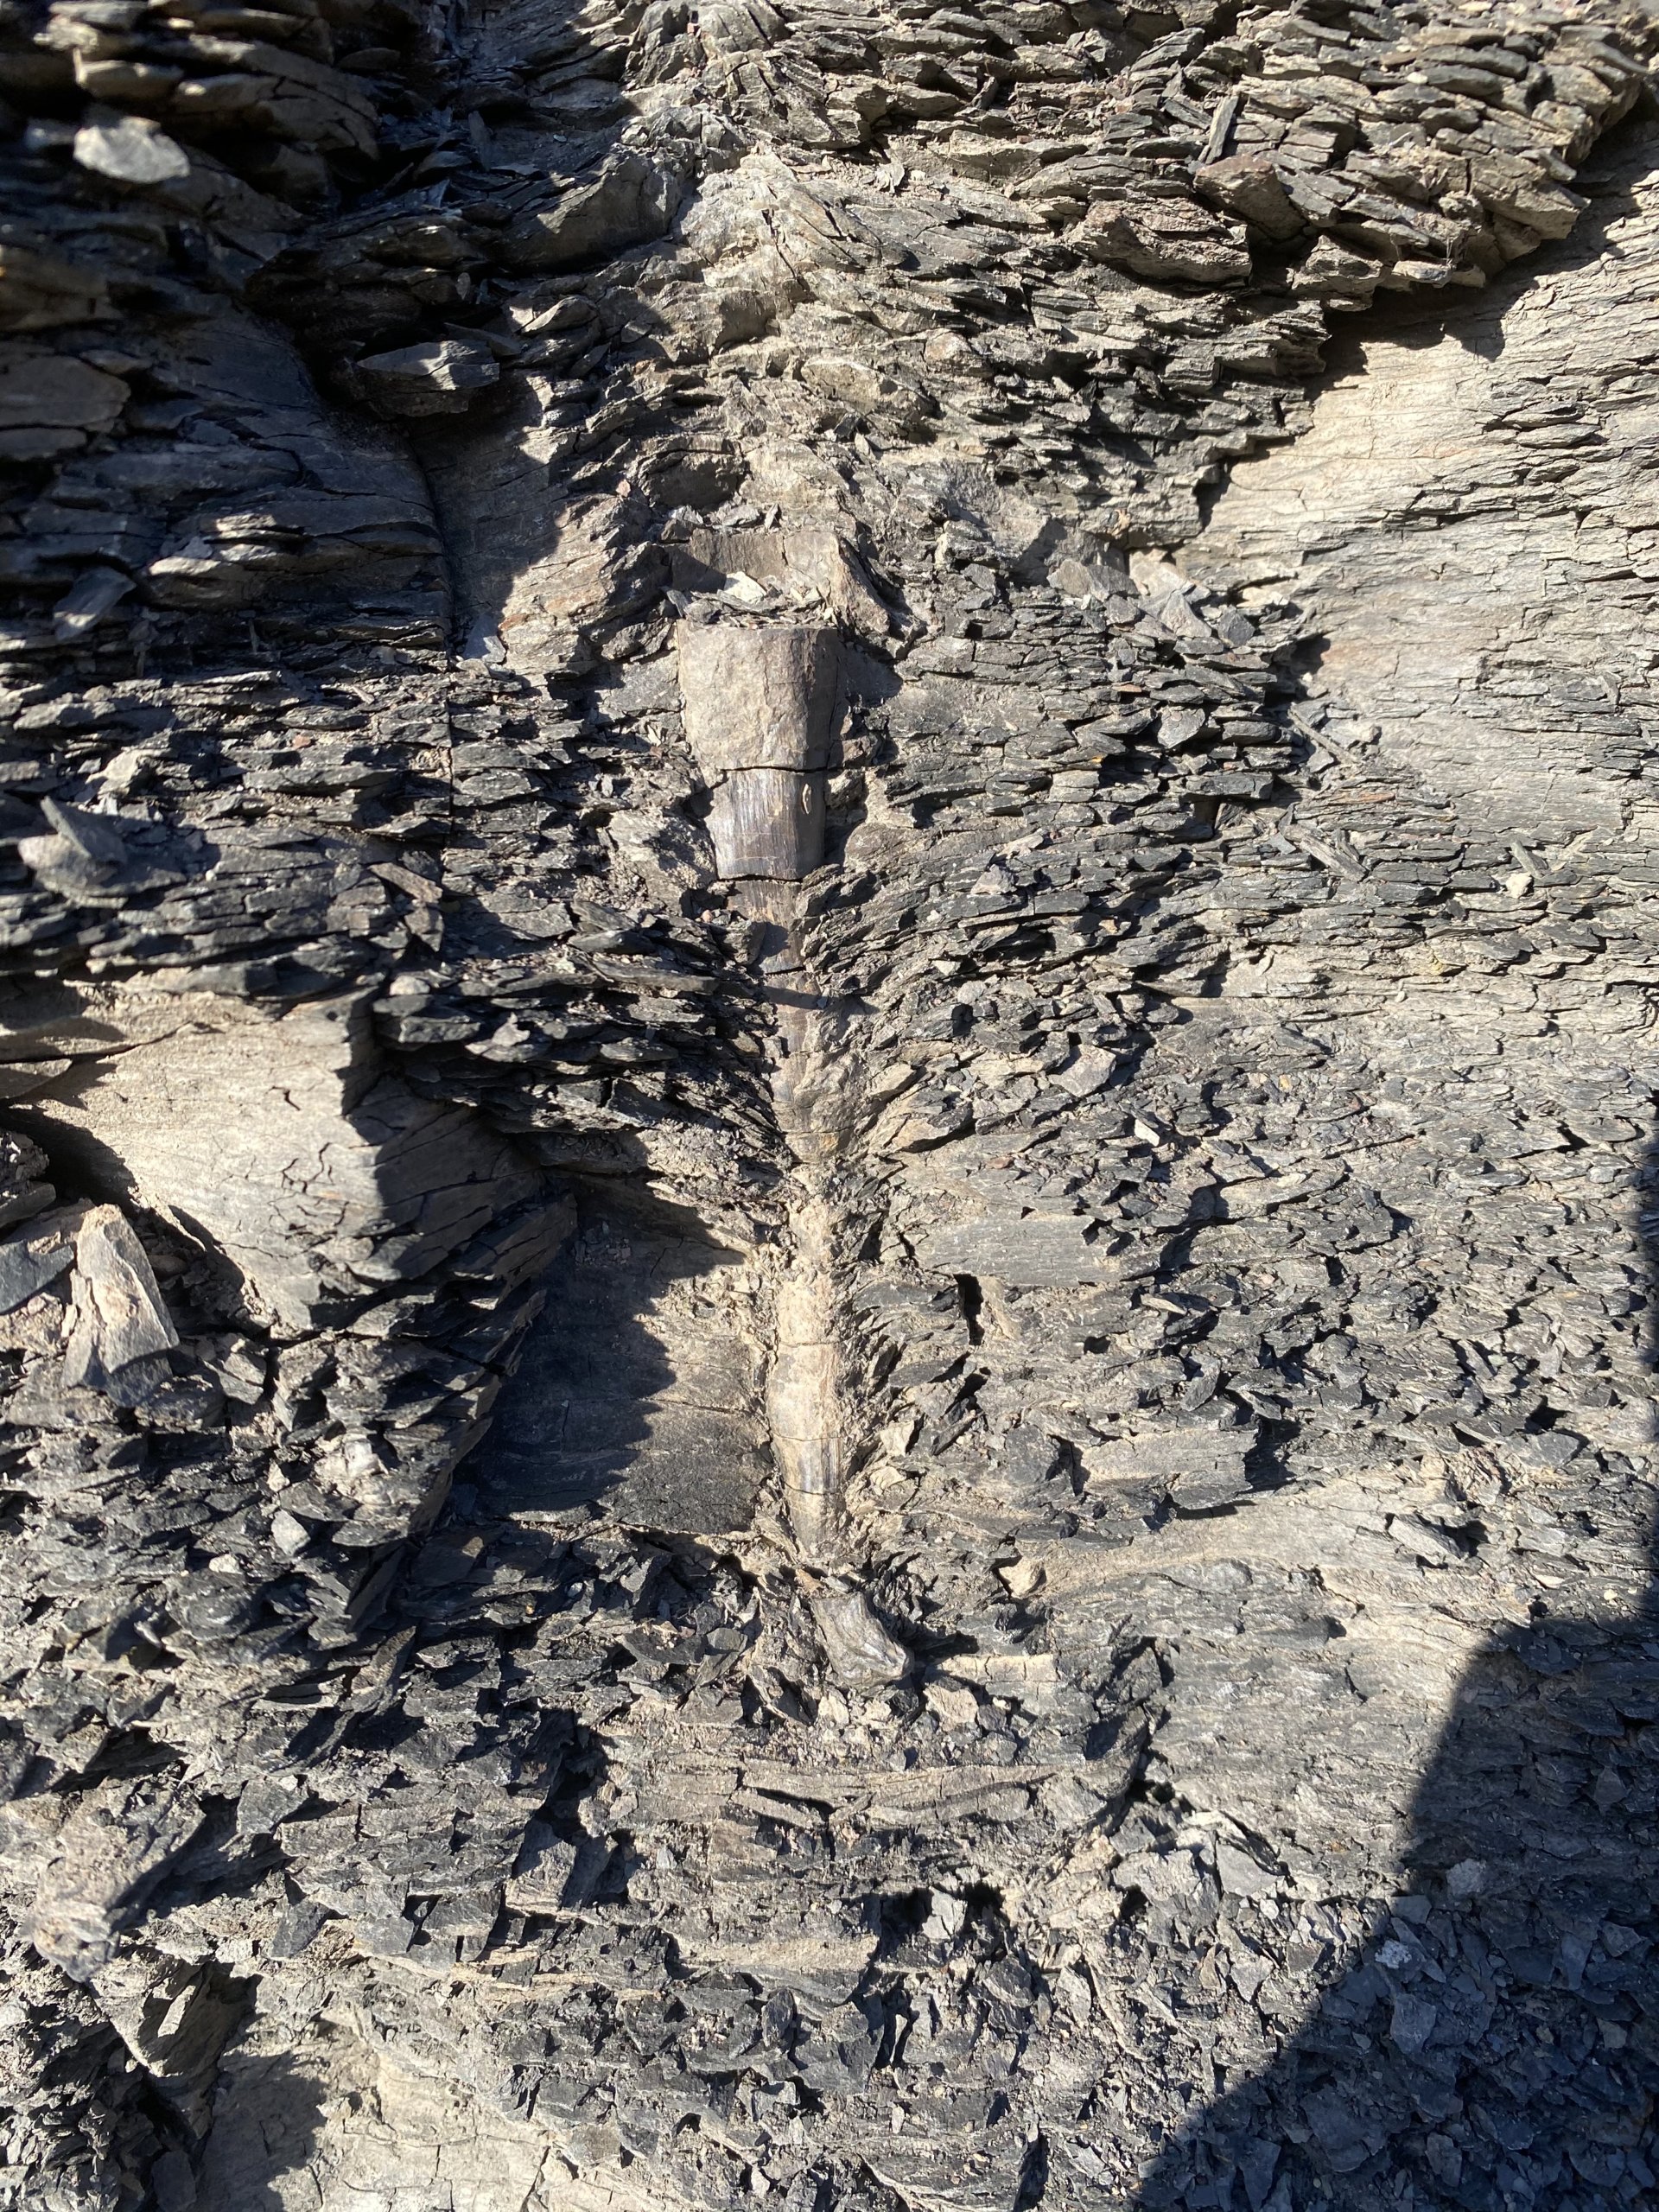 Petrified taproot in-situ. Located in shale immediately above the Pine Creek limestone.